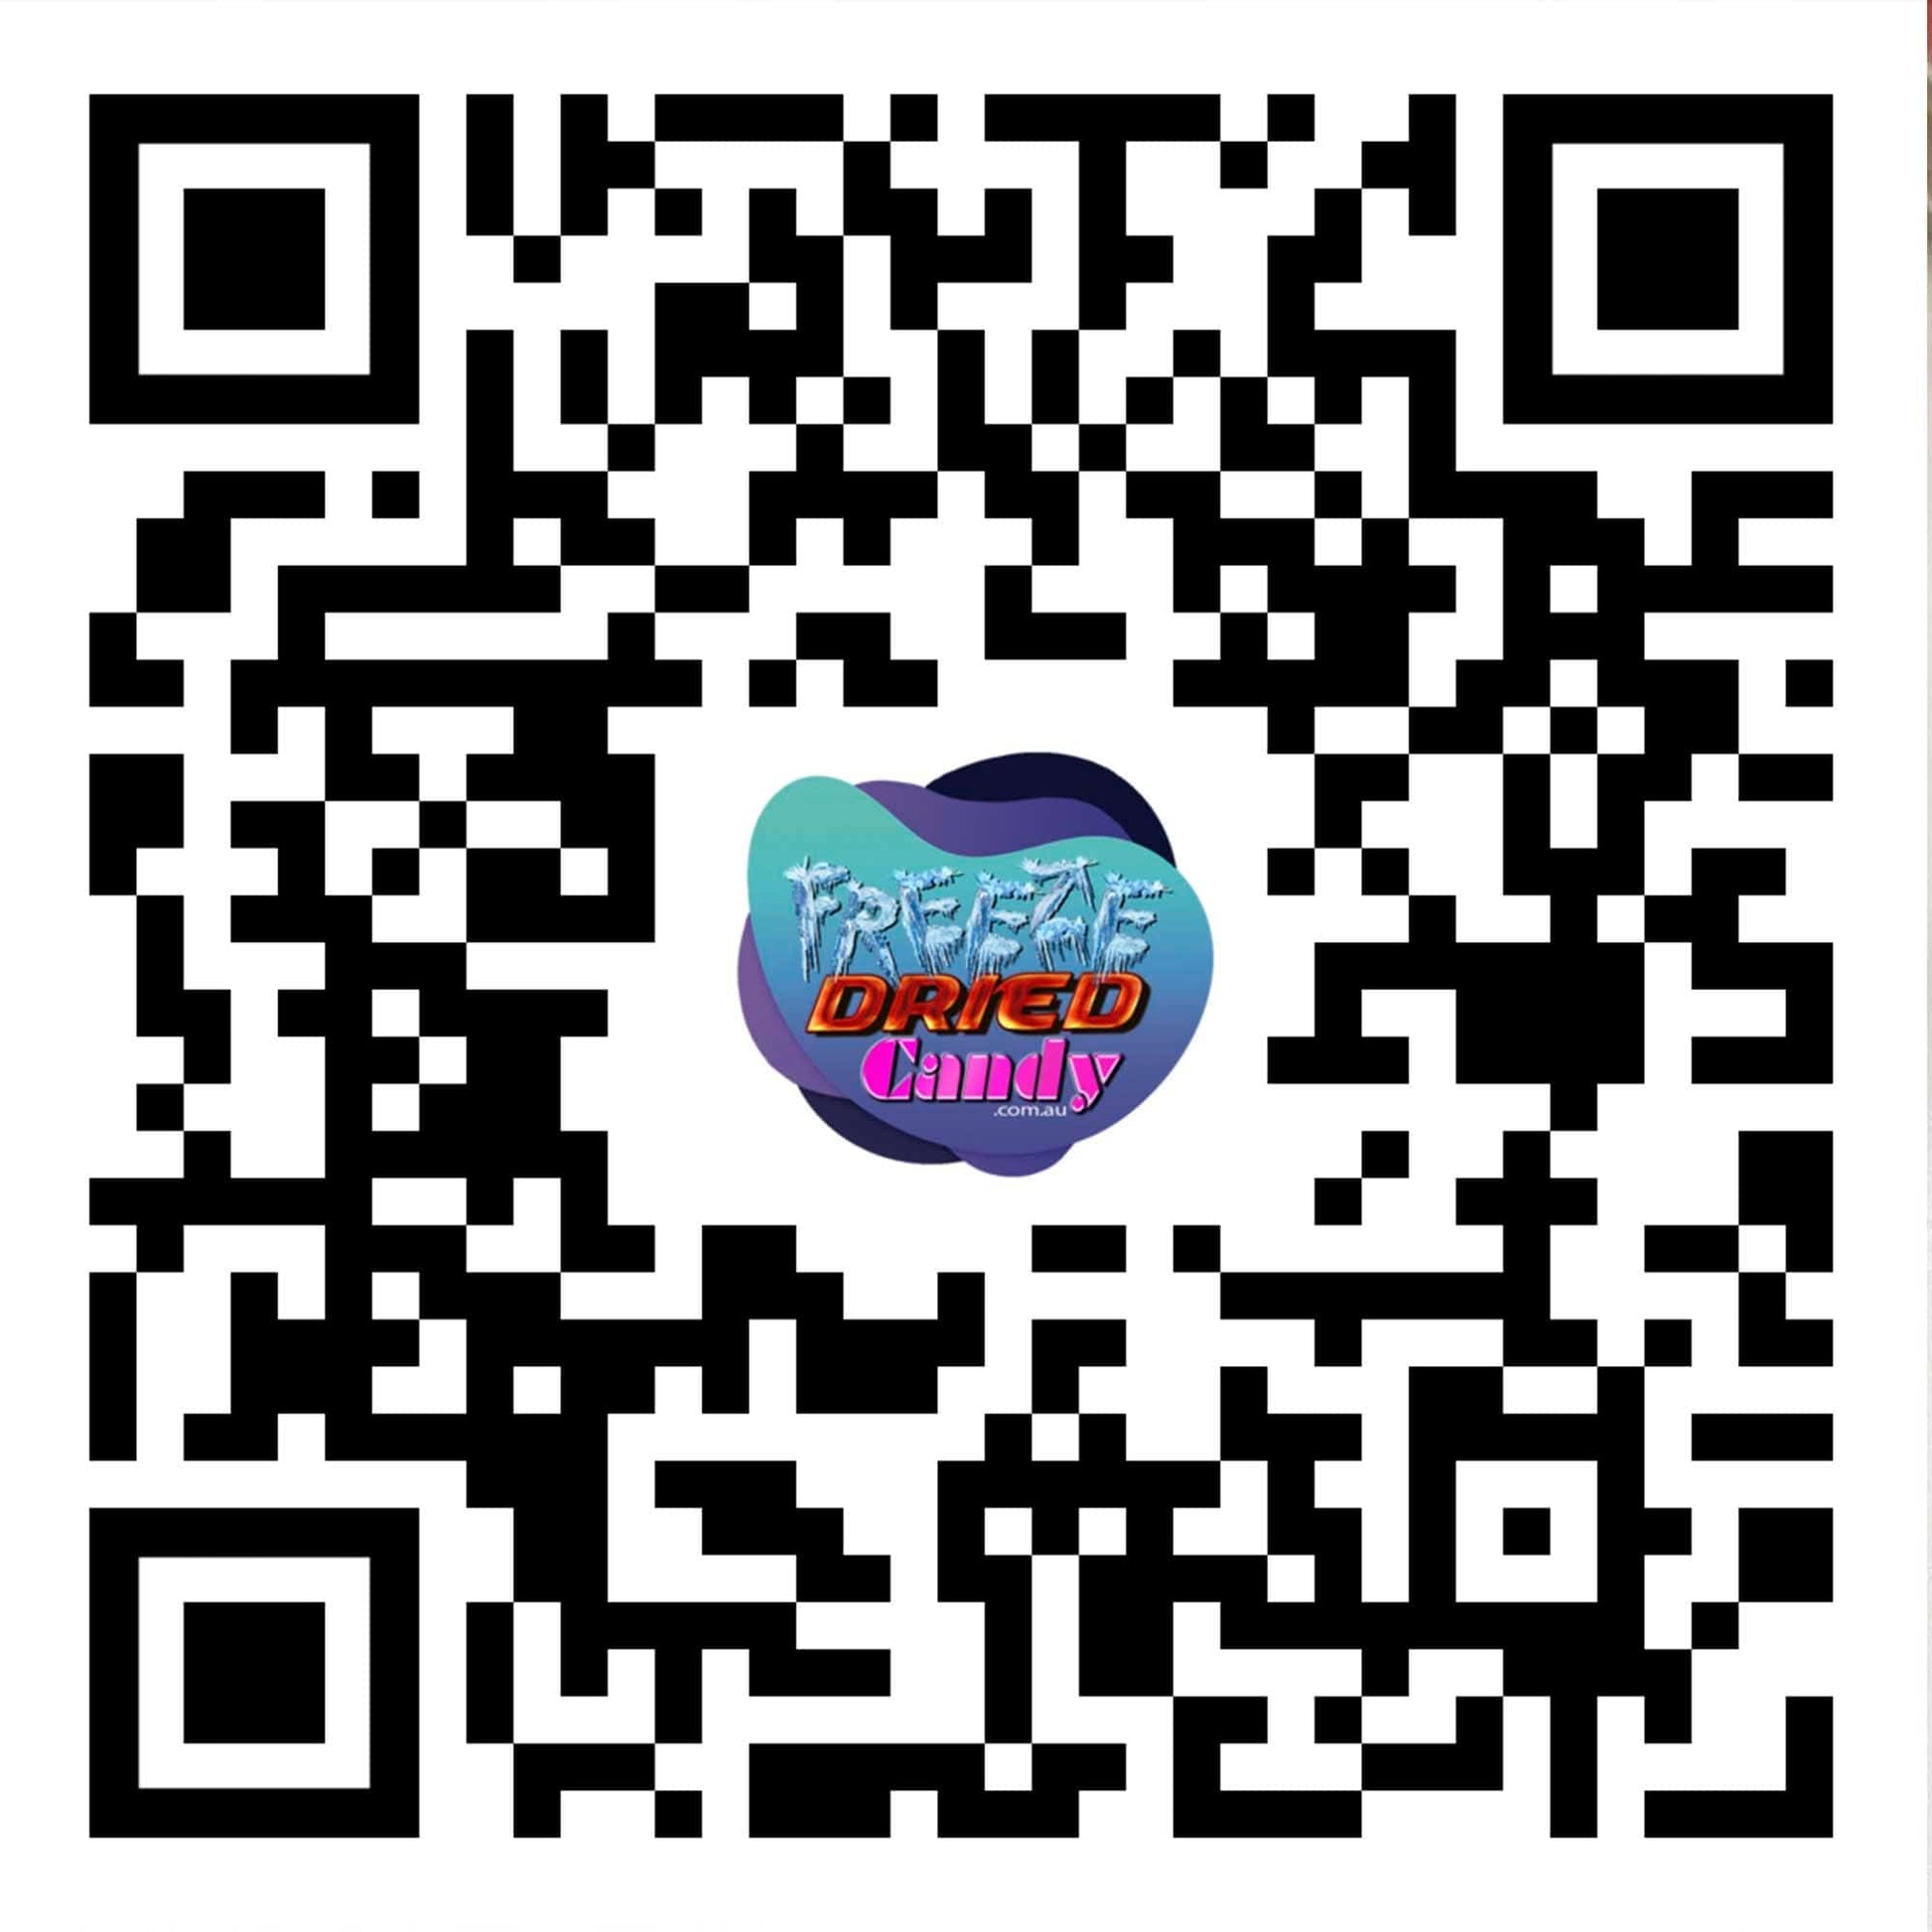 Freeze Dried Candy QR code, find us on the internet and social media